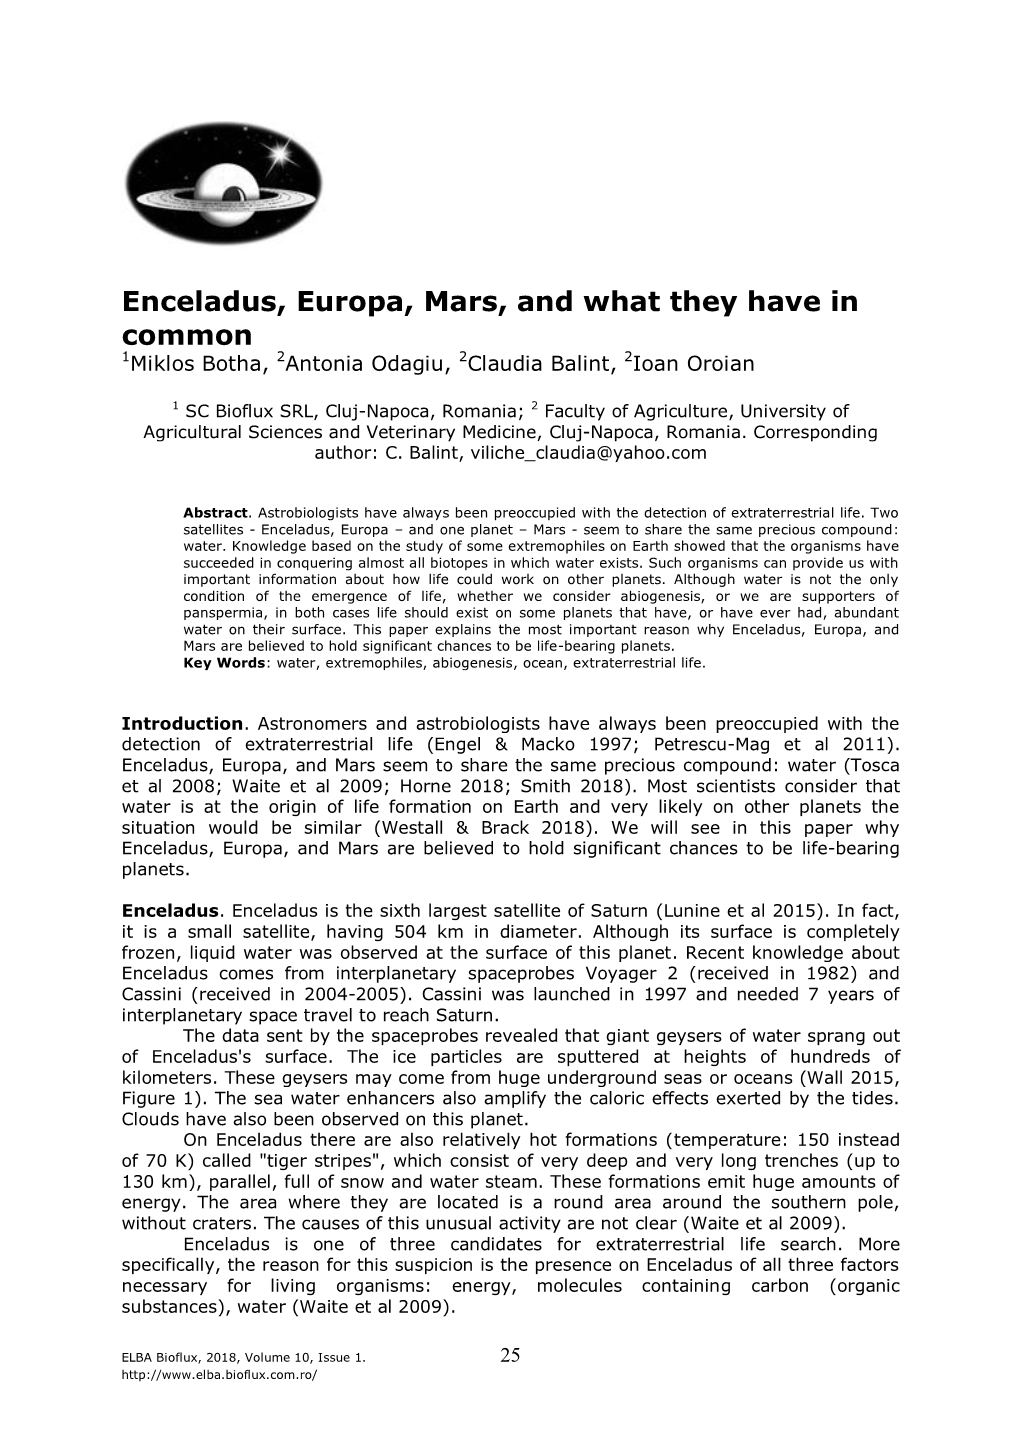 Botha M., Odagiu A., Balint C., Oroian I., 2018 Enceladus, Europa, Mars, and What They Have in Common